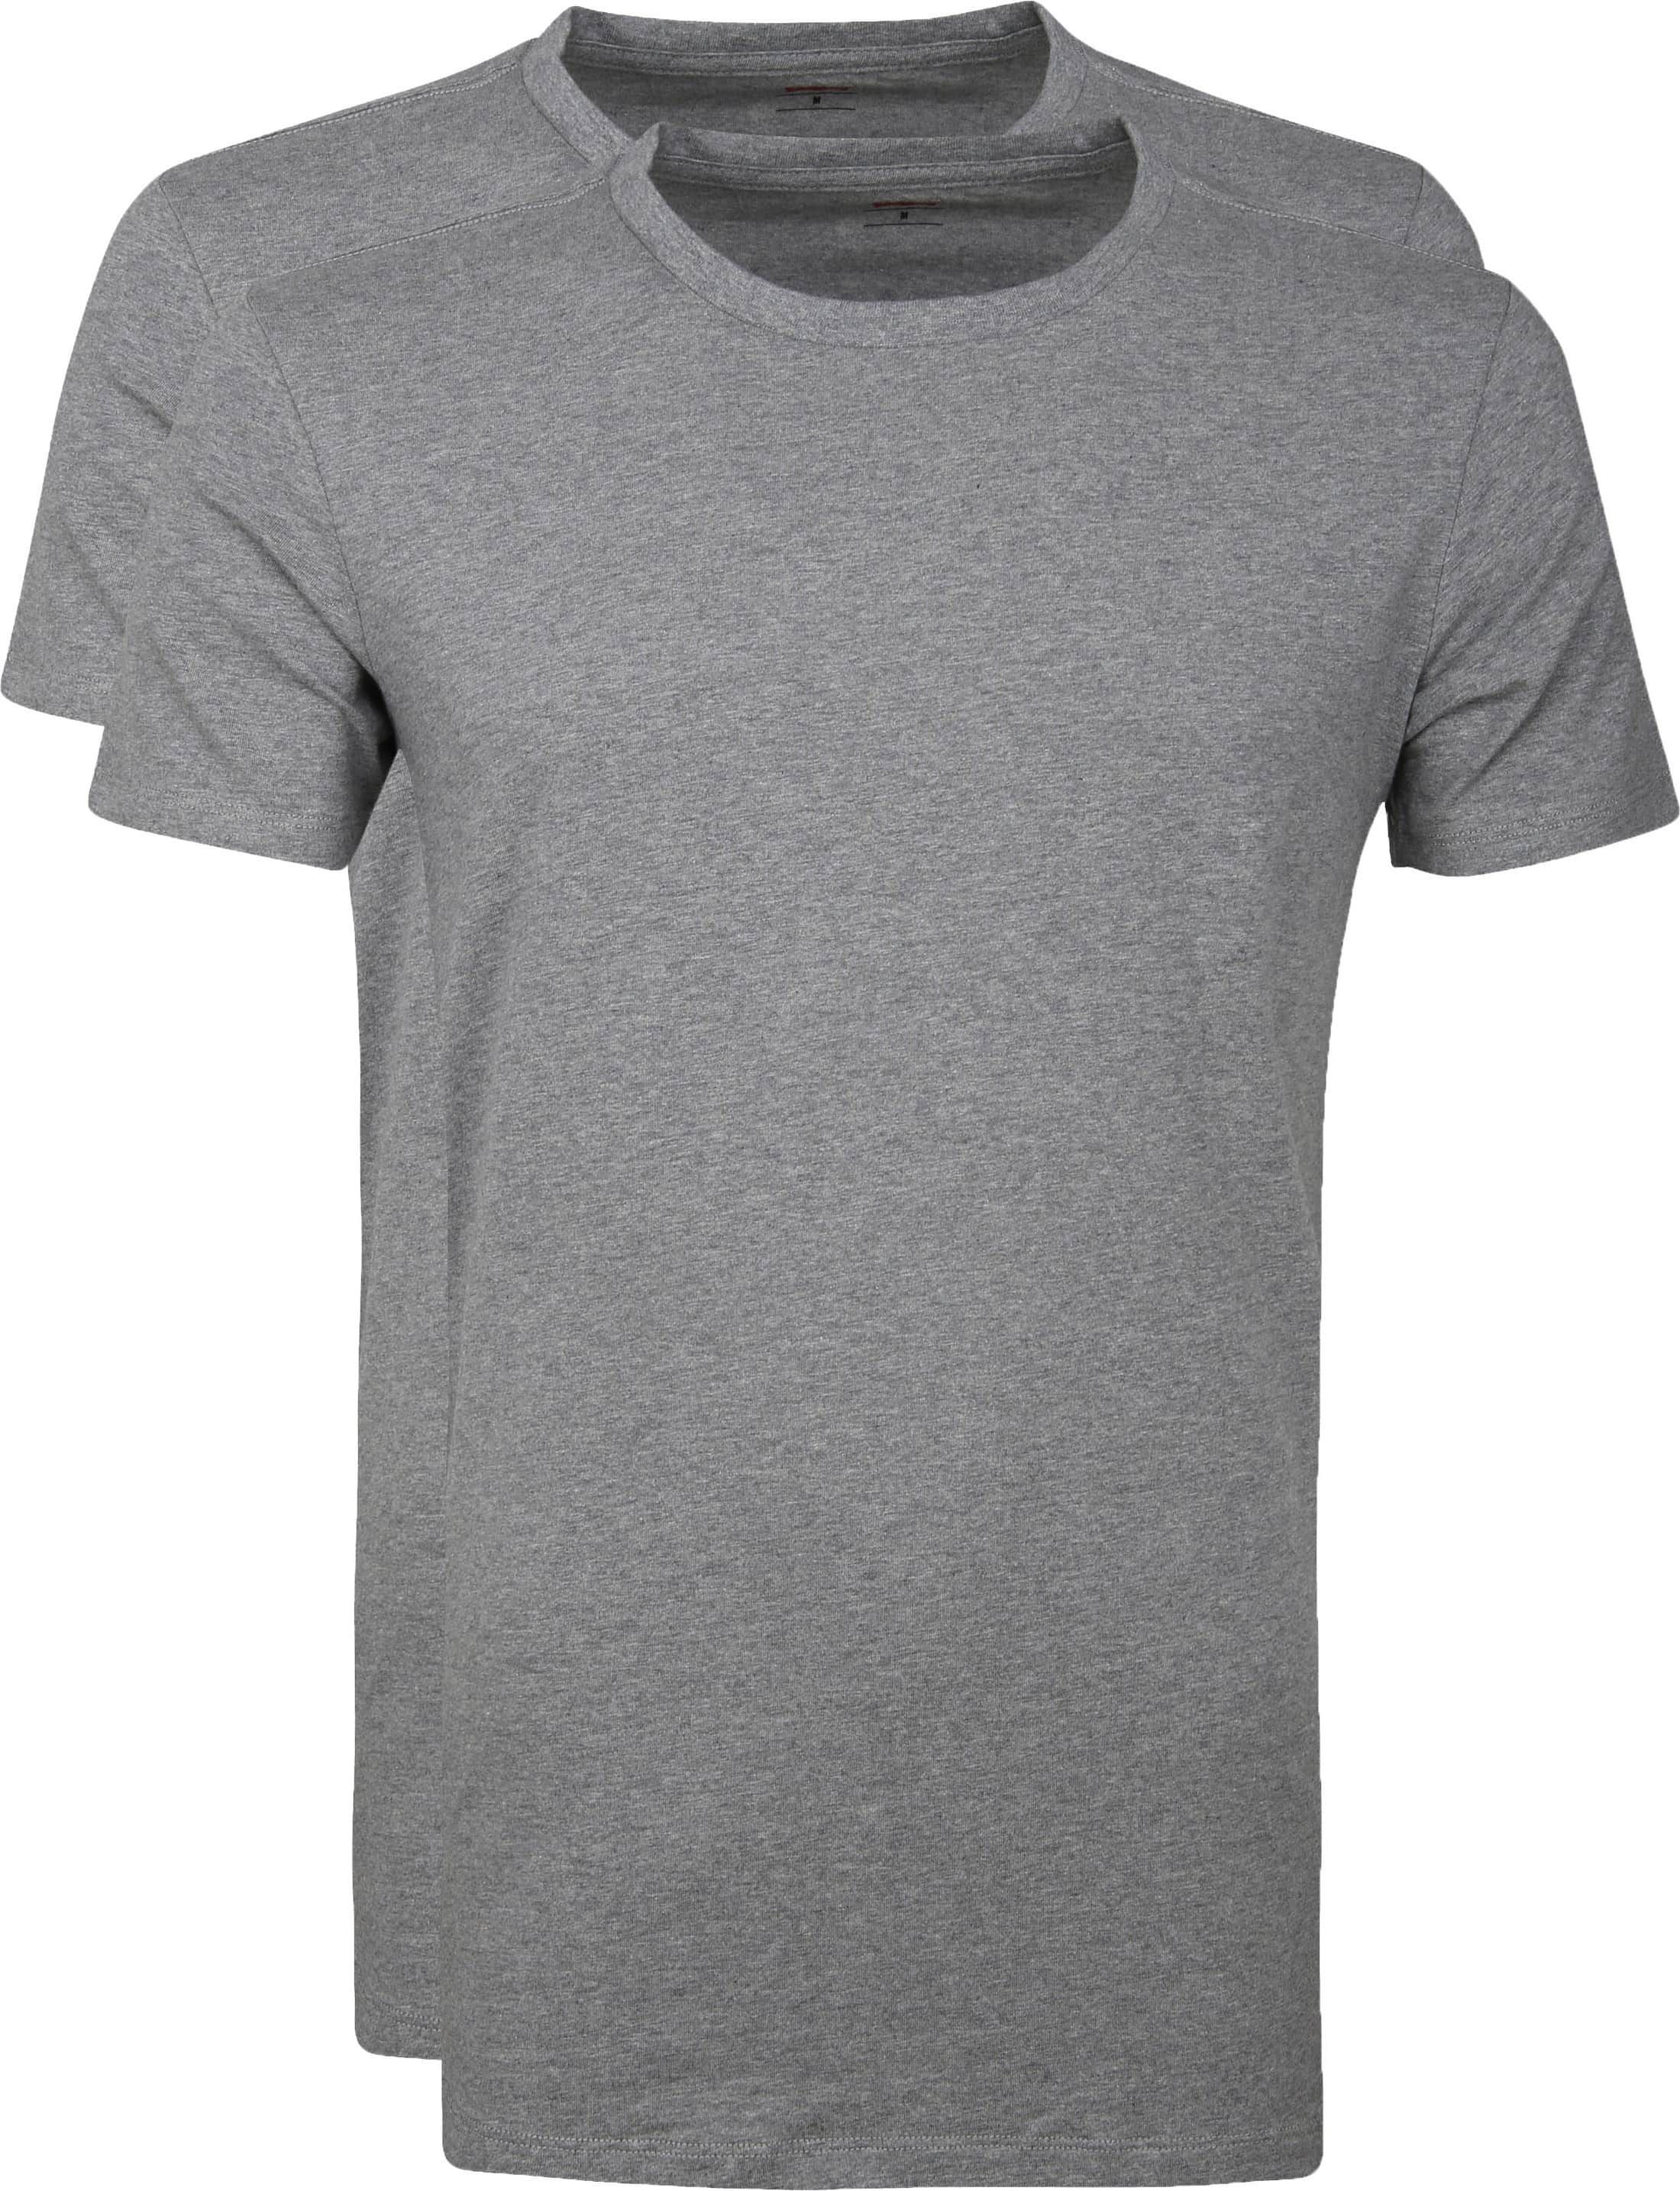 Levi's T-shirt Round Neck 2Pack Grey size S